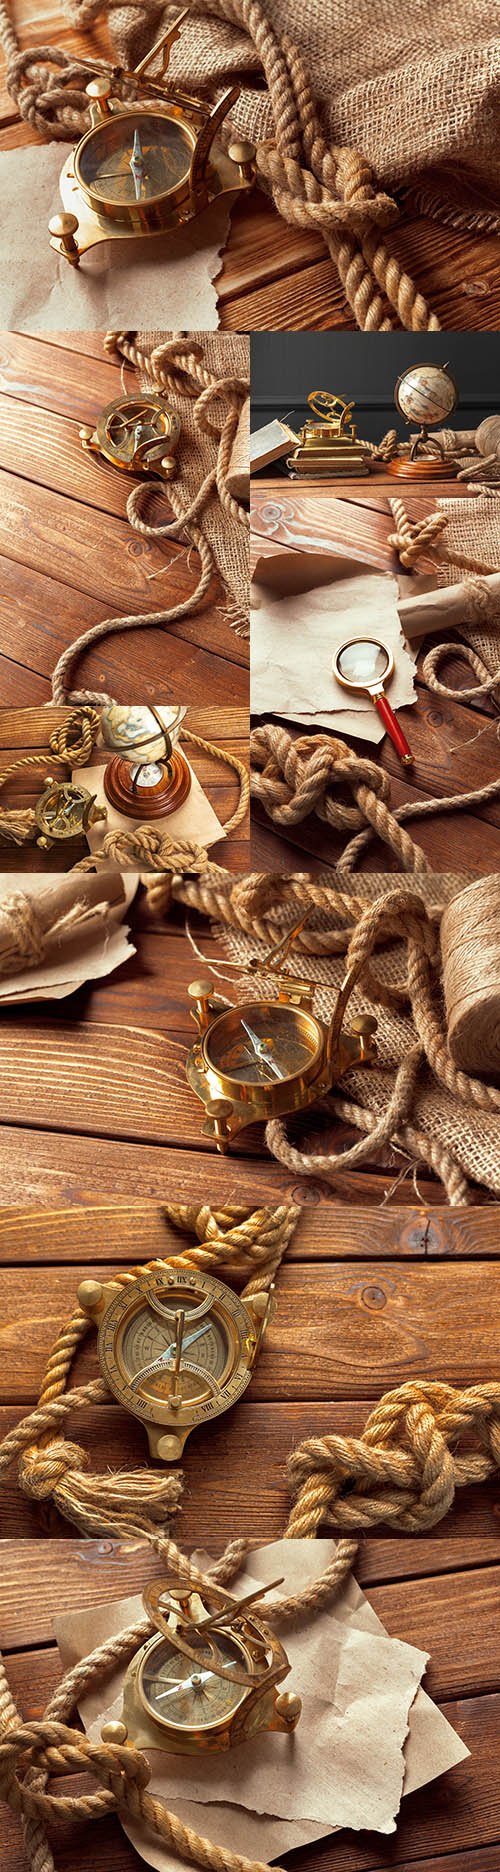 Antique things compass, rope and maps for travel